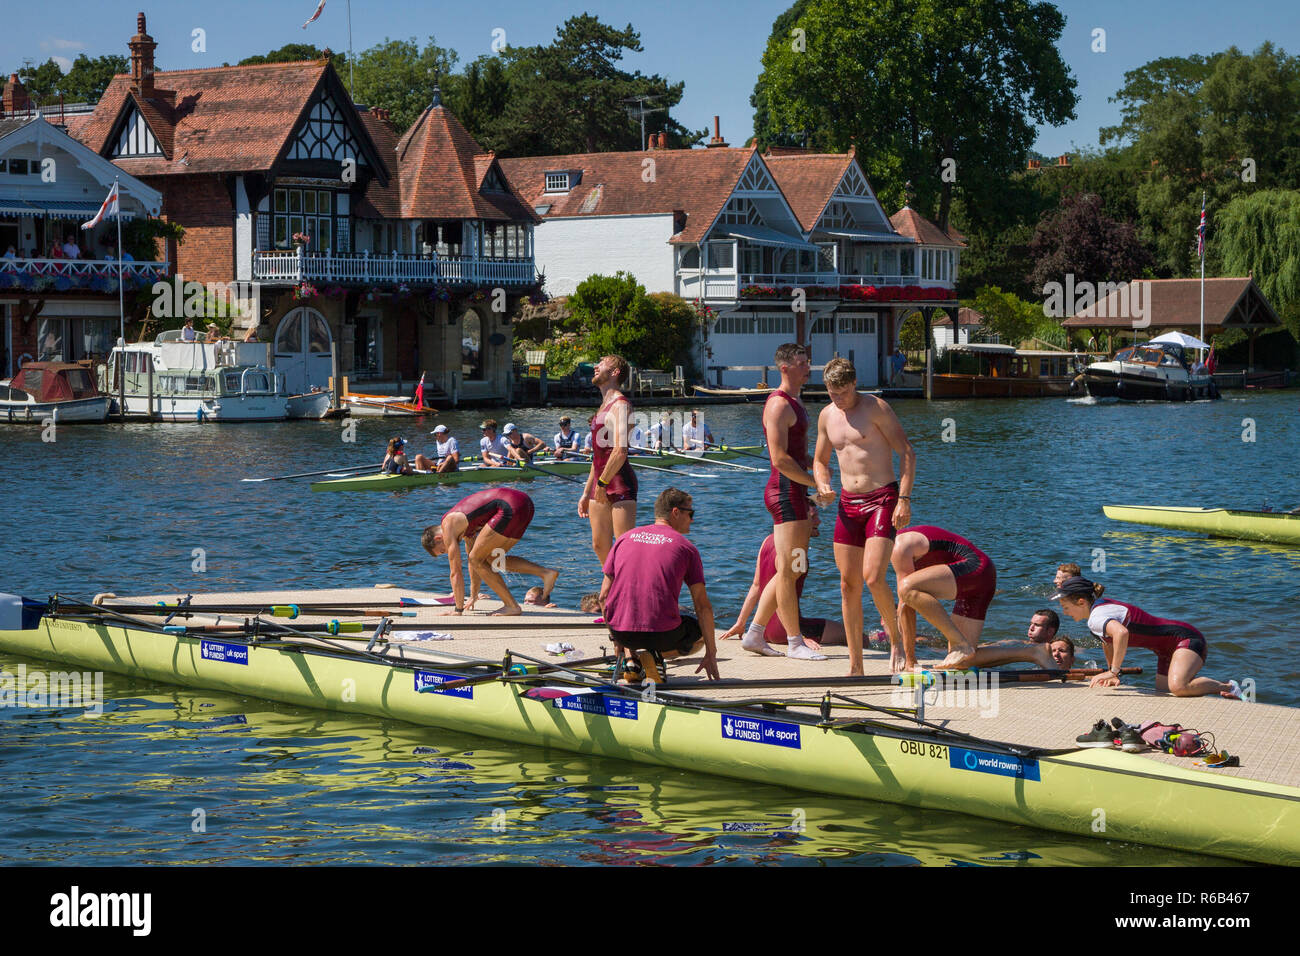 A victorious Oxford Brookes crew climb out of the water after winning their race at Henley Royal Regatta Stock Photo